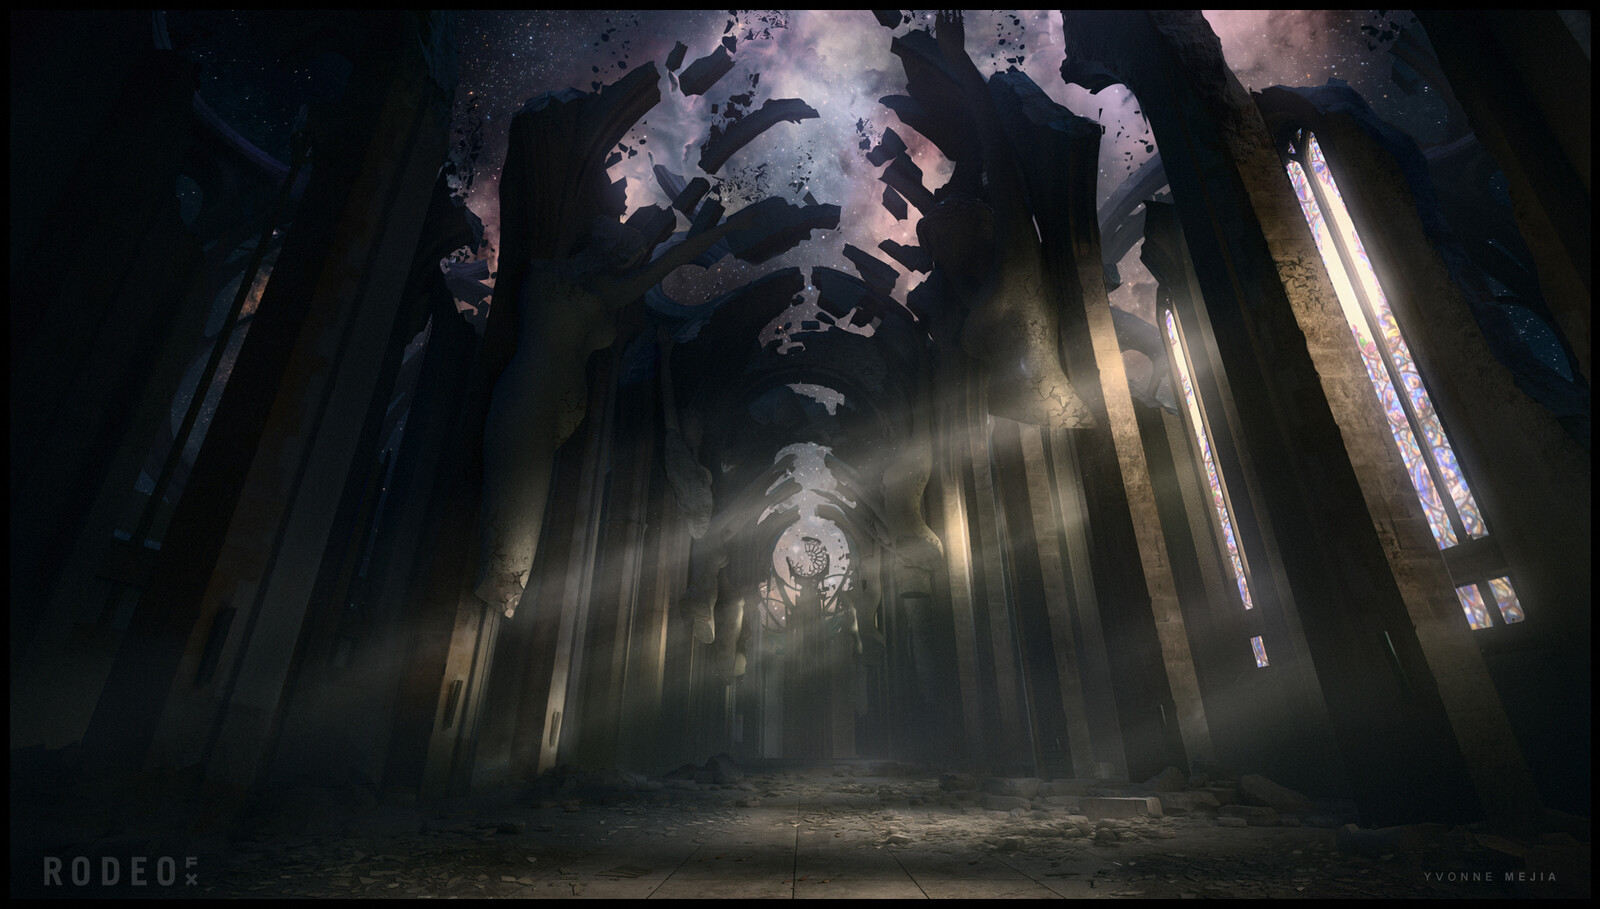 Throne Room Ruins, using a combination of 2D/3D elements. One of the challenges was to showcase an environment with two different lighting scenarios, cool light from cosmic sky above and sunlight coming in from stained glass windows.